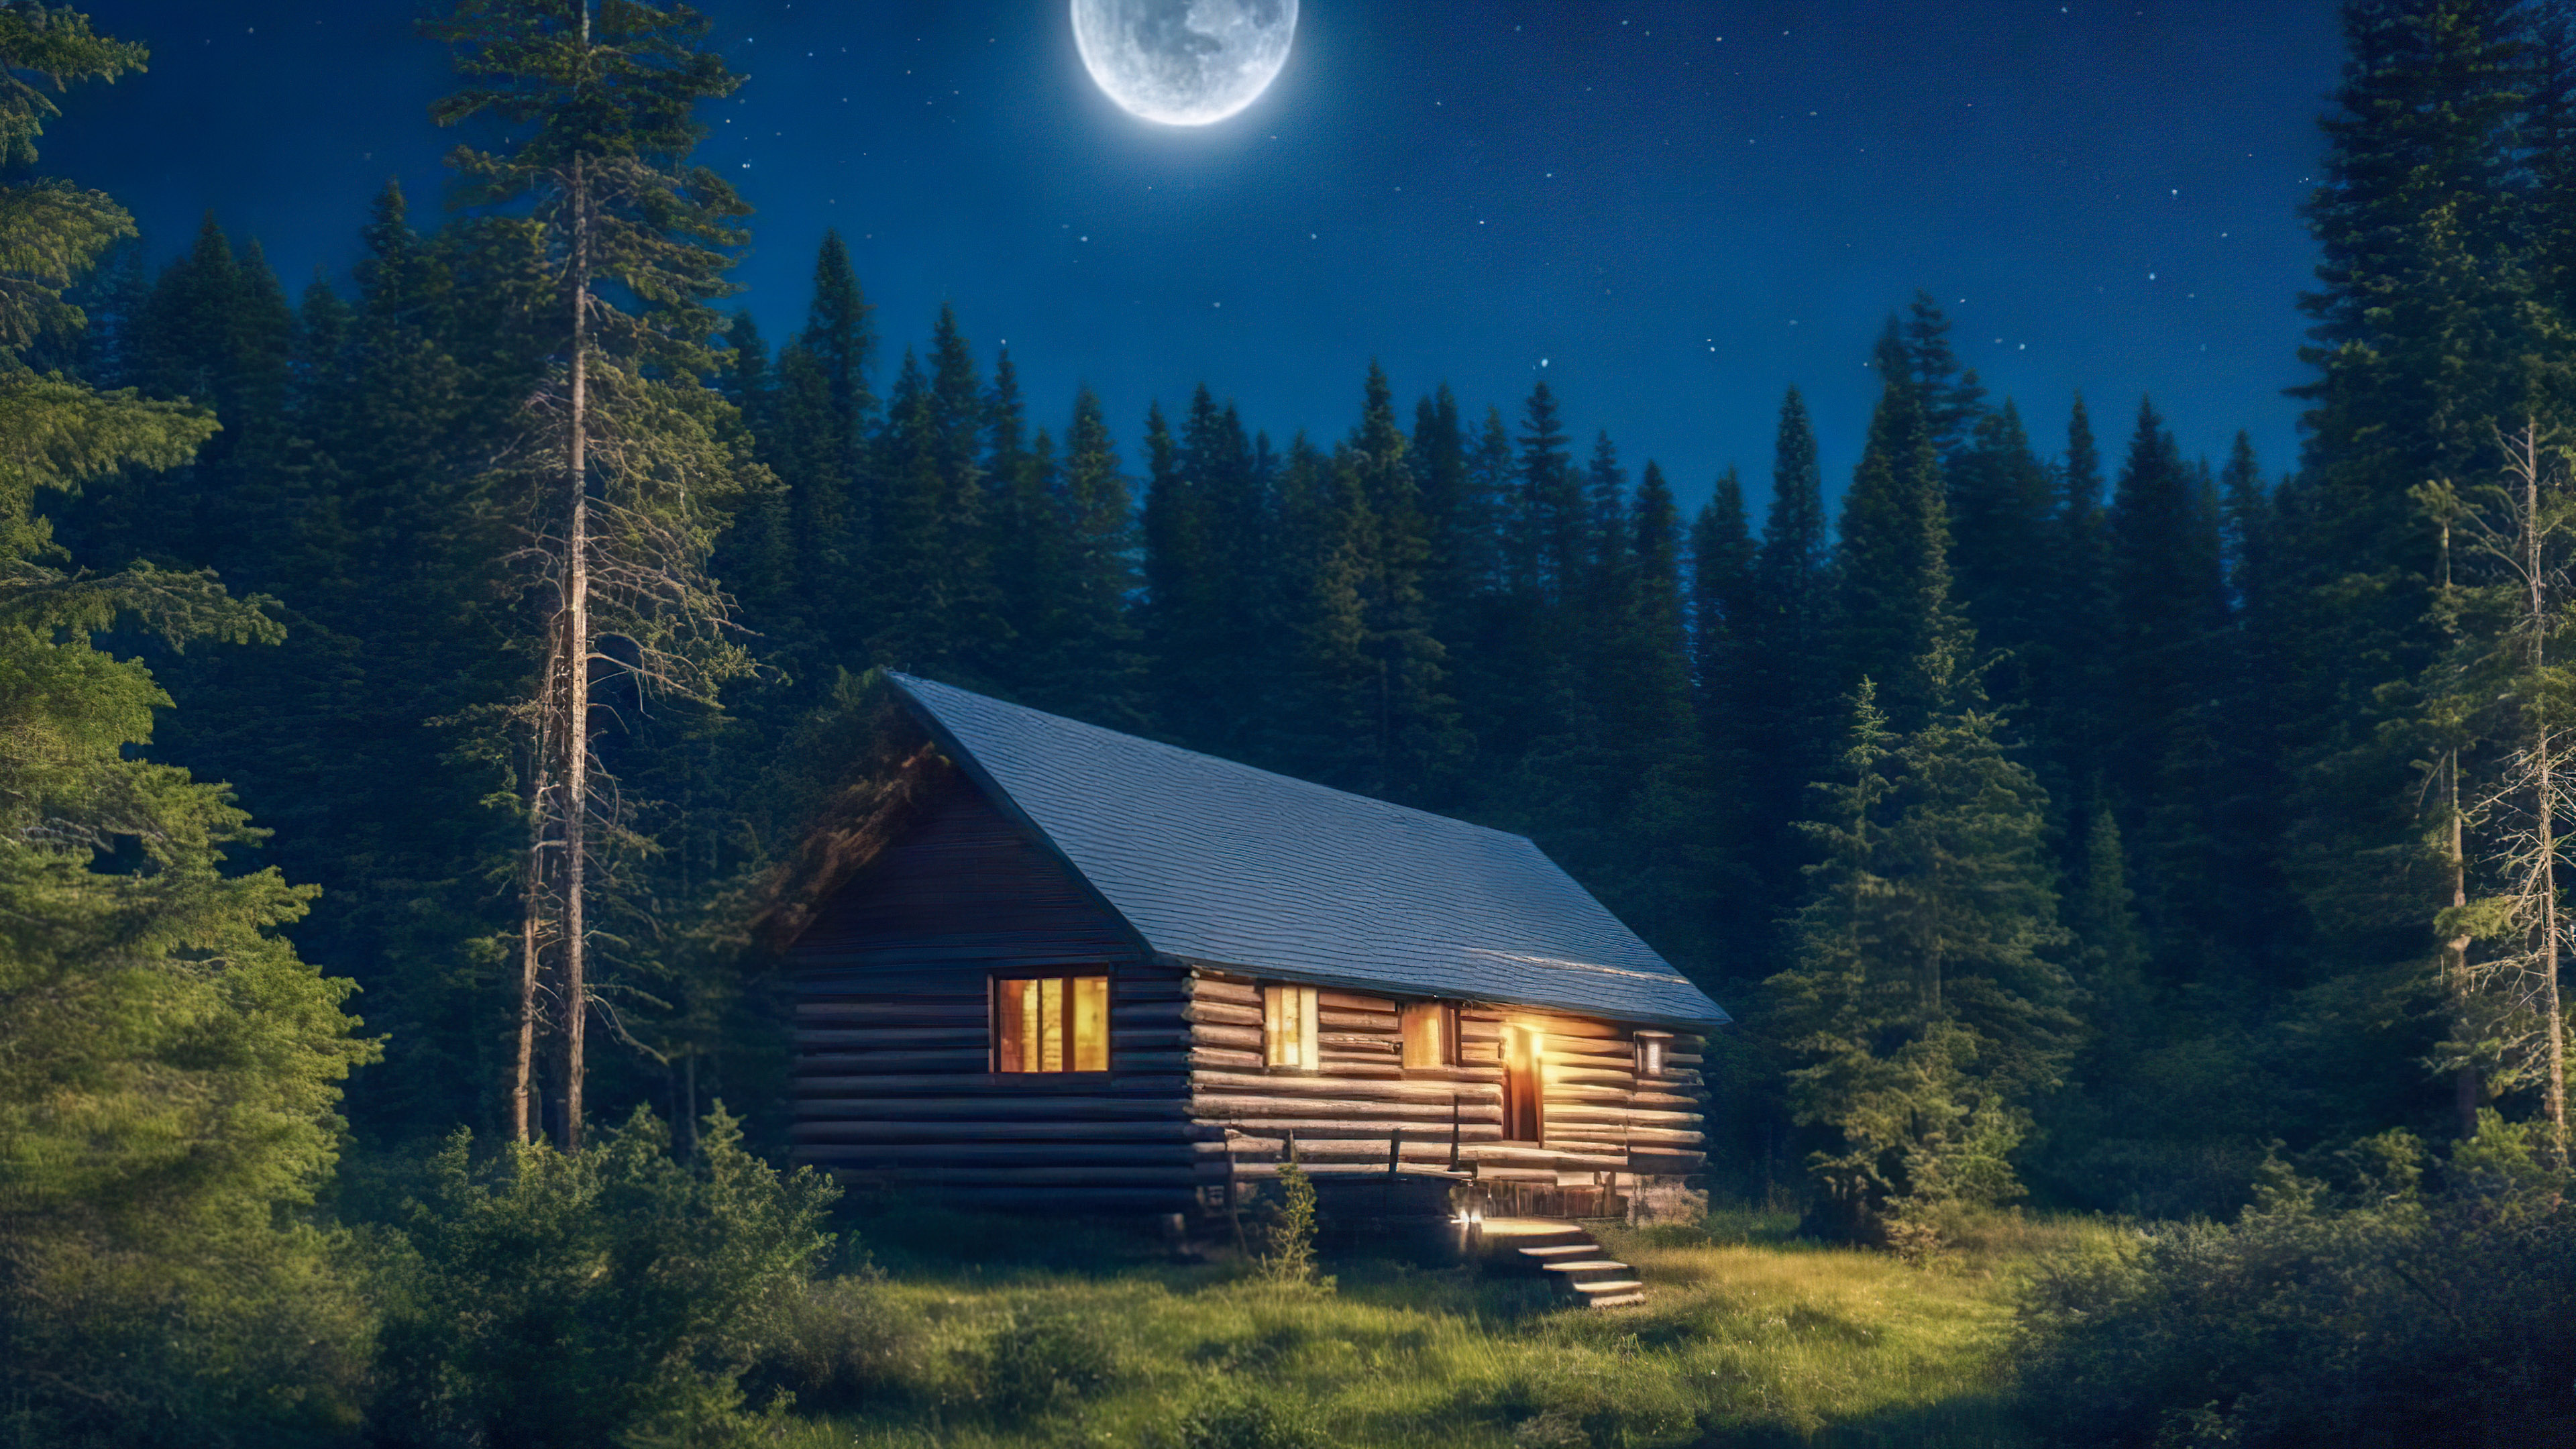 Adorn your PC with 4K night sky wallpaper, featuring a cozy cabin nestled among pine trees, bathed in the gentle light of a full moon.